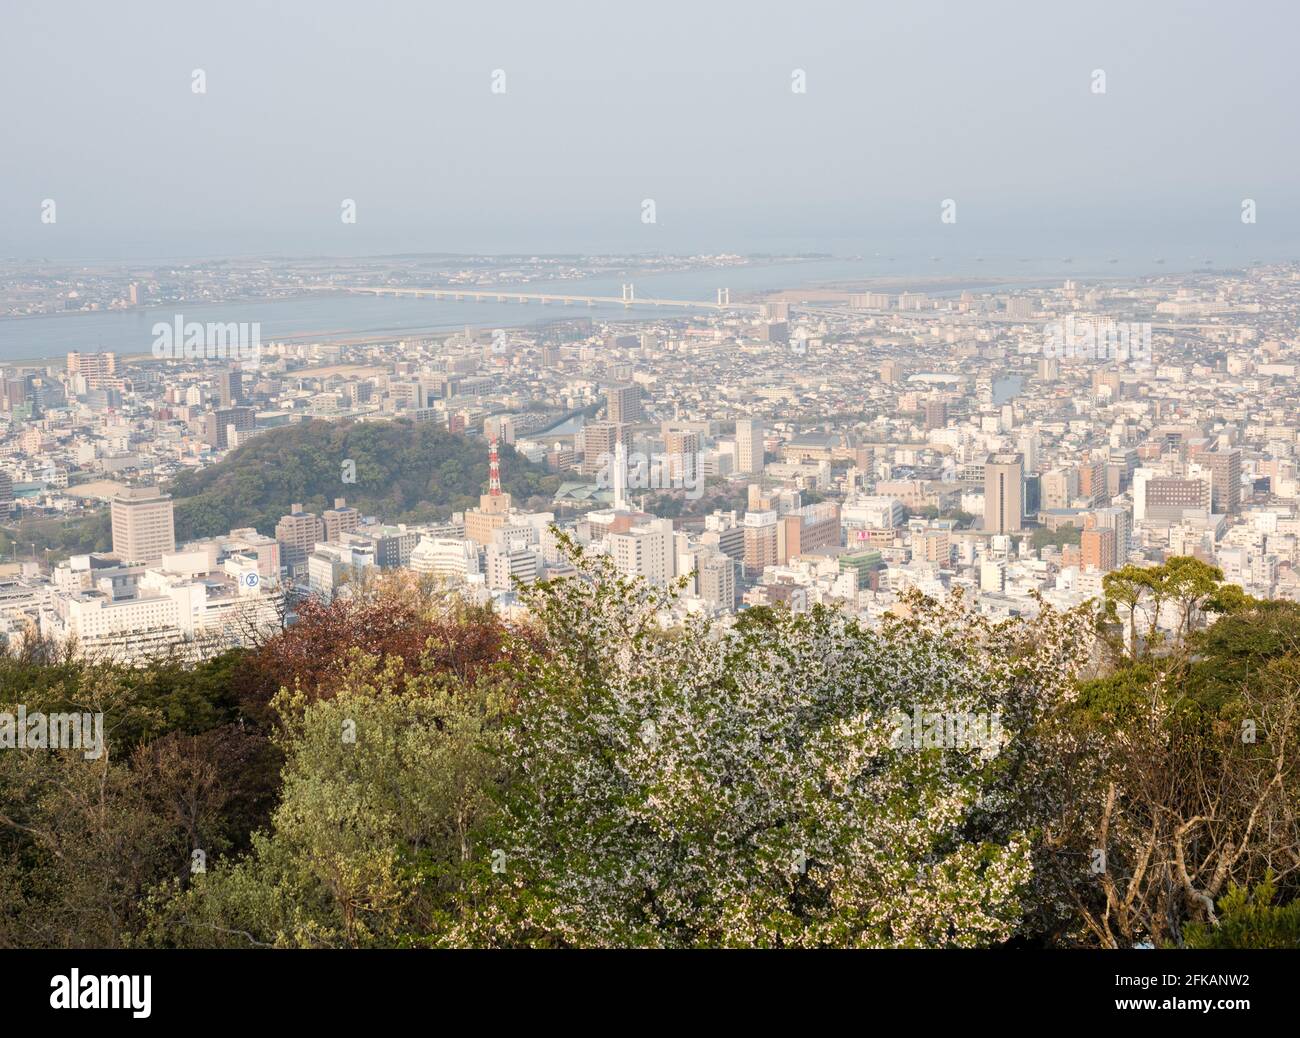 Tokushima, Japan - April 4, 2018: Panoramic view of Tokushima city from the top of Mount Bizan at sunset with cherry trees blooming Stock Photo